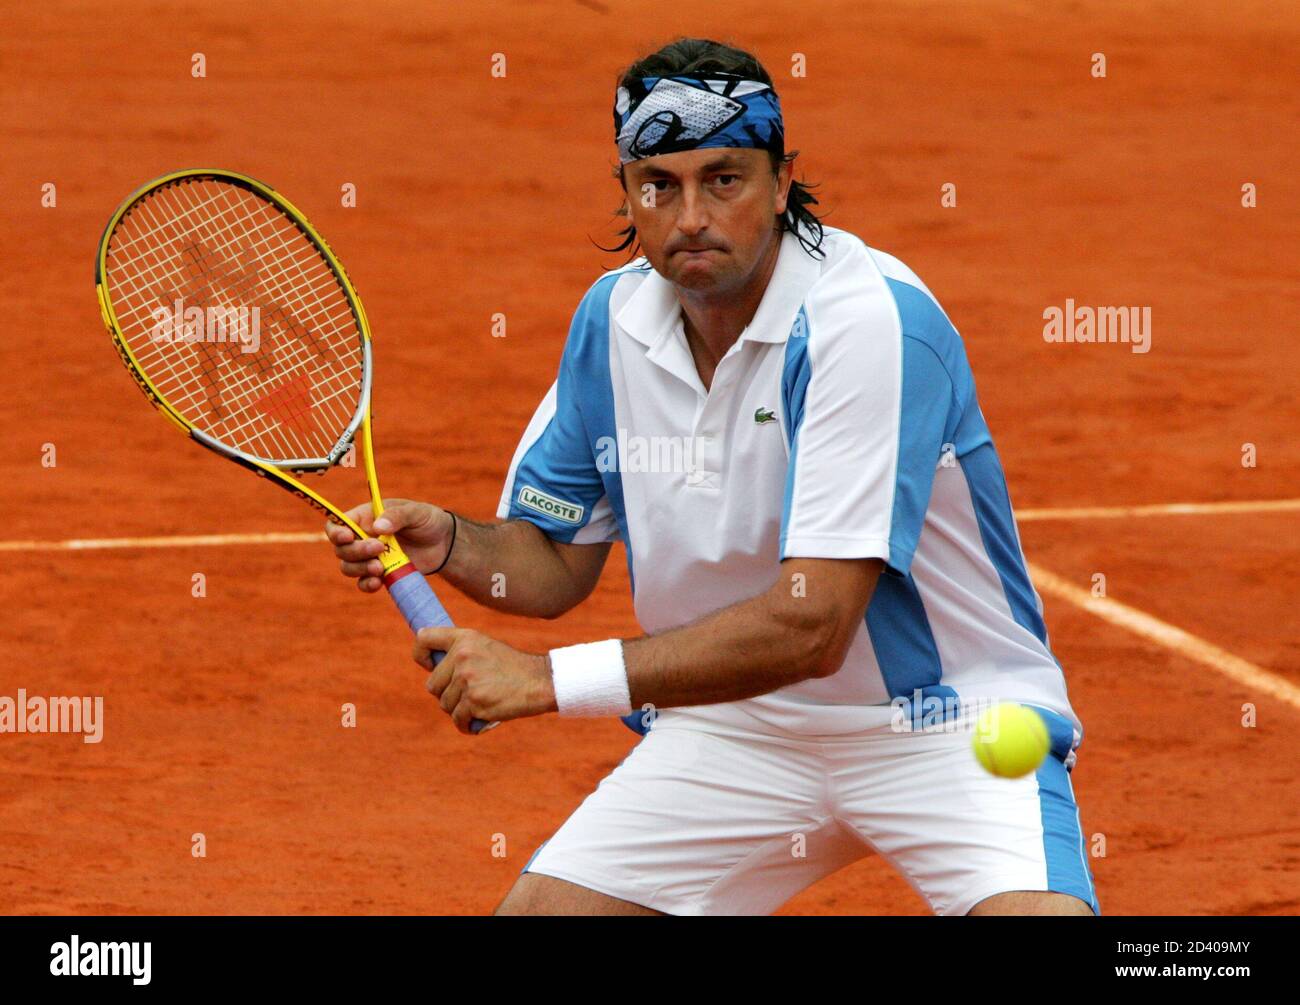 French former tennis star Leconte hits a forehand to Australia's Cash and  France's Champion during their veteran's double match at Roland Garros  stadium in Paris. French former tennis star Henri Leconte hits